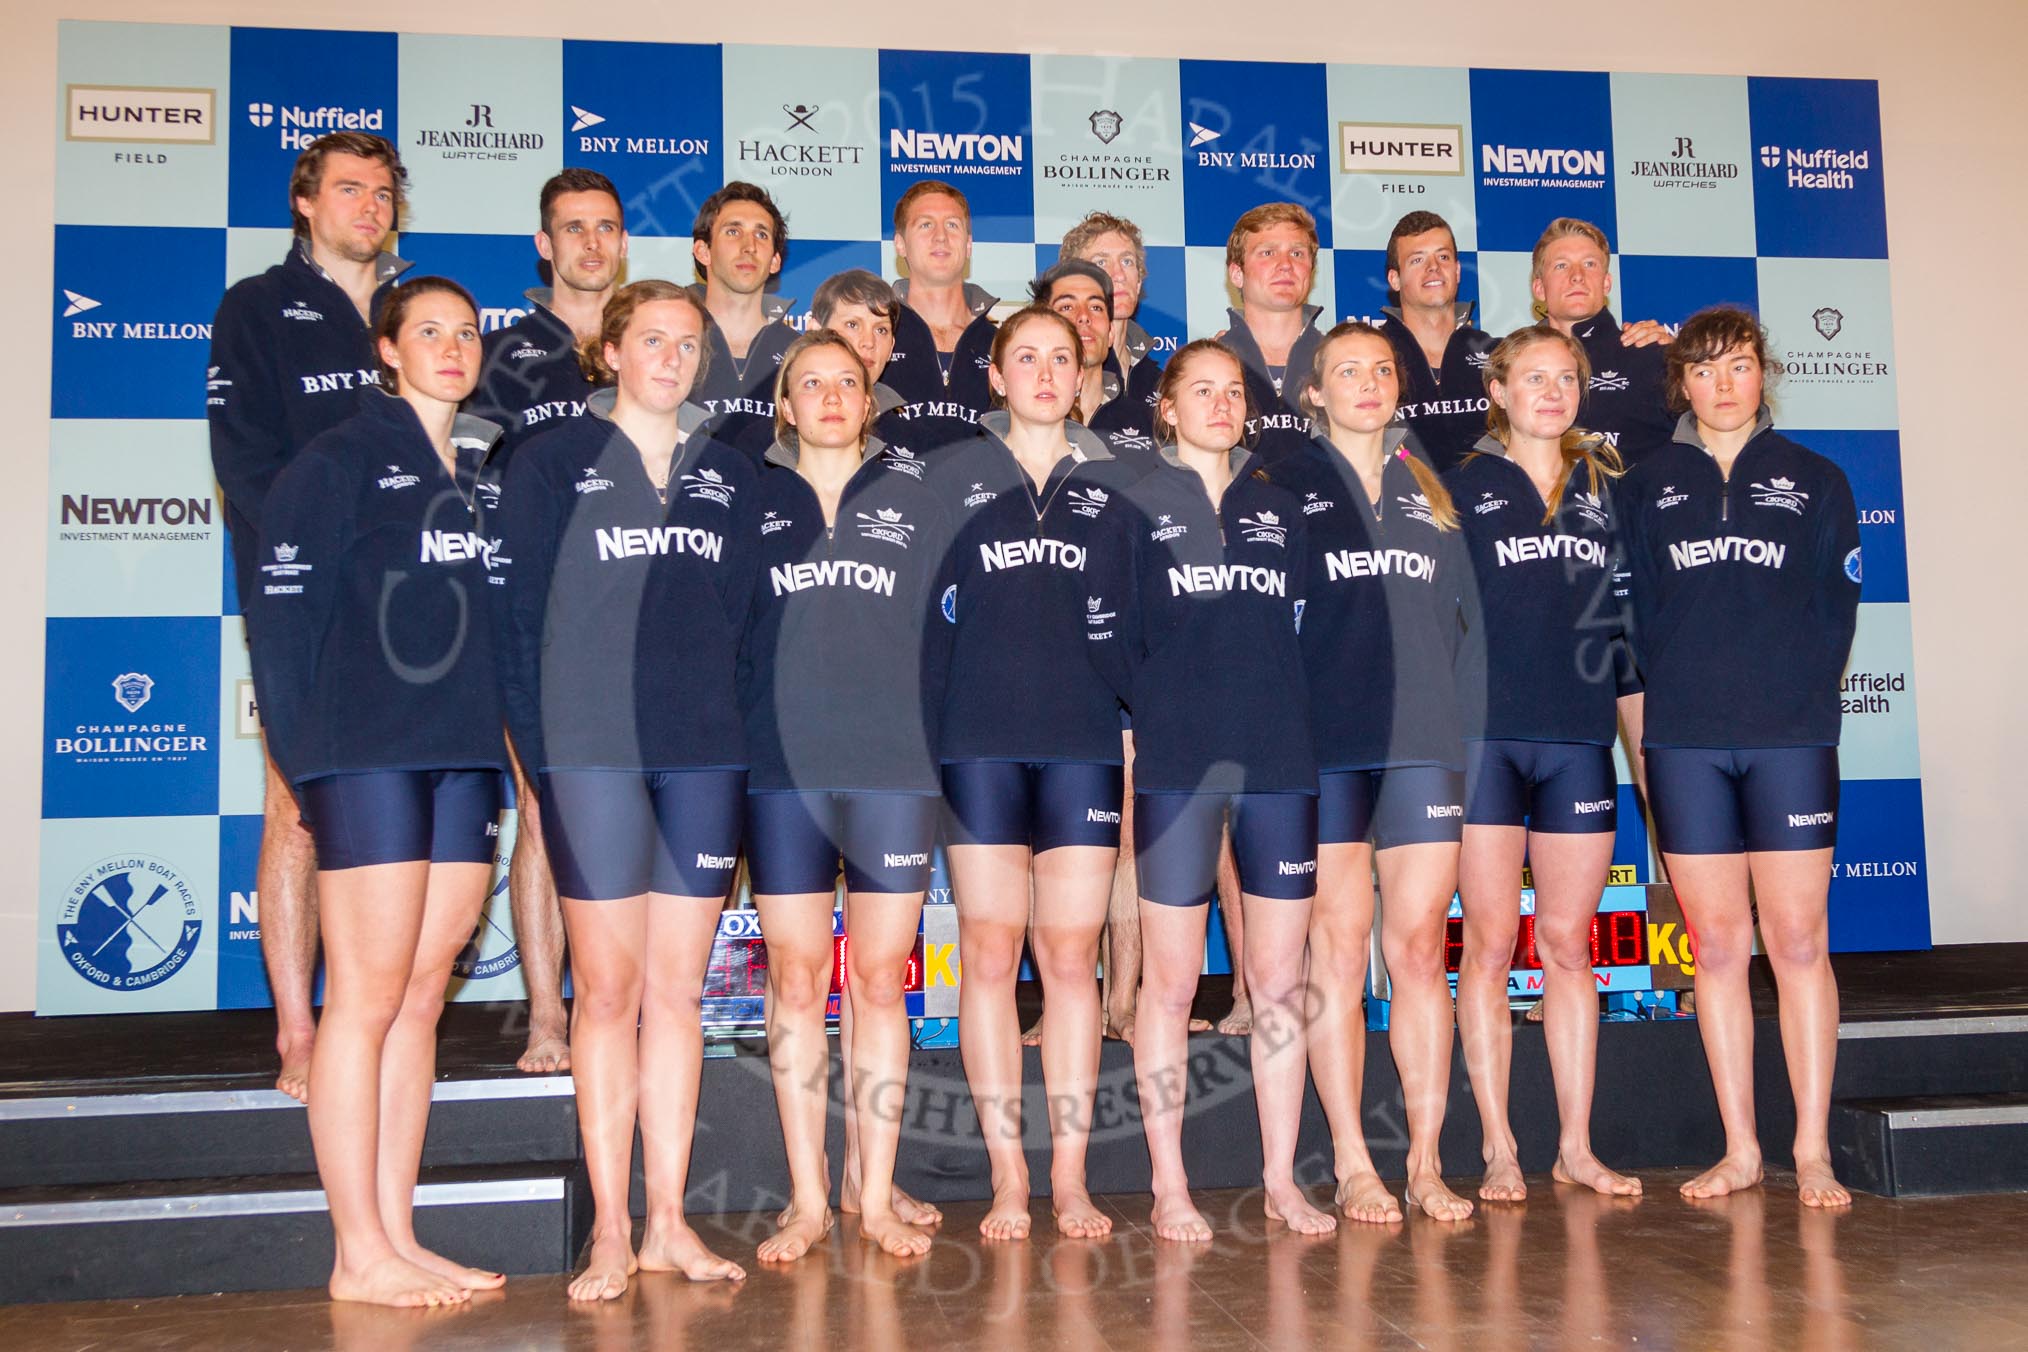 The 2015 Women's Boat Race and Boat Race Oxford Blue Boat crews together